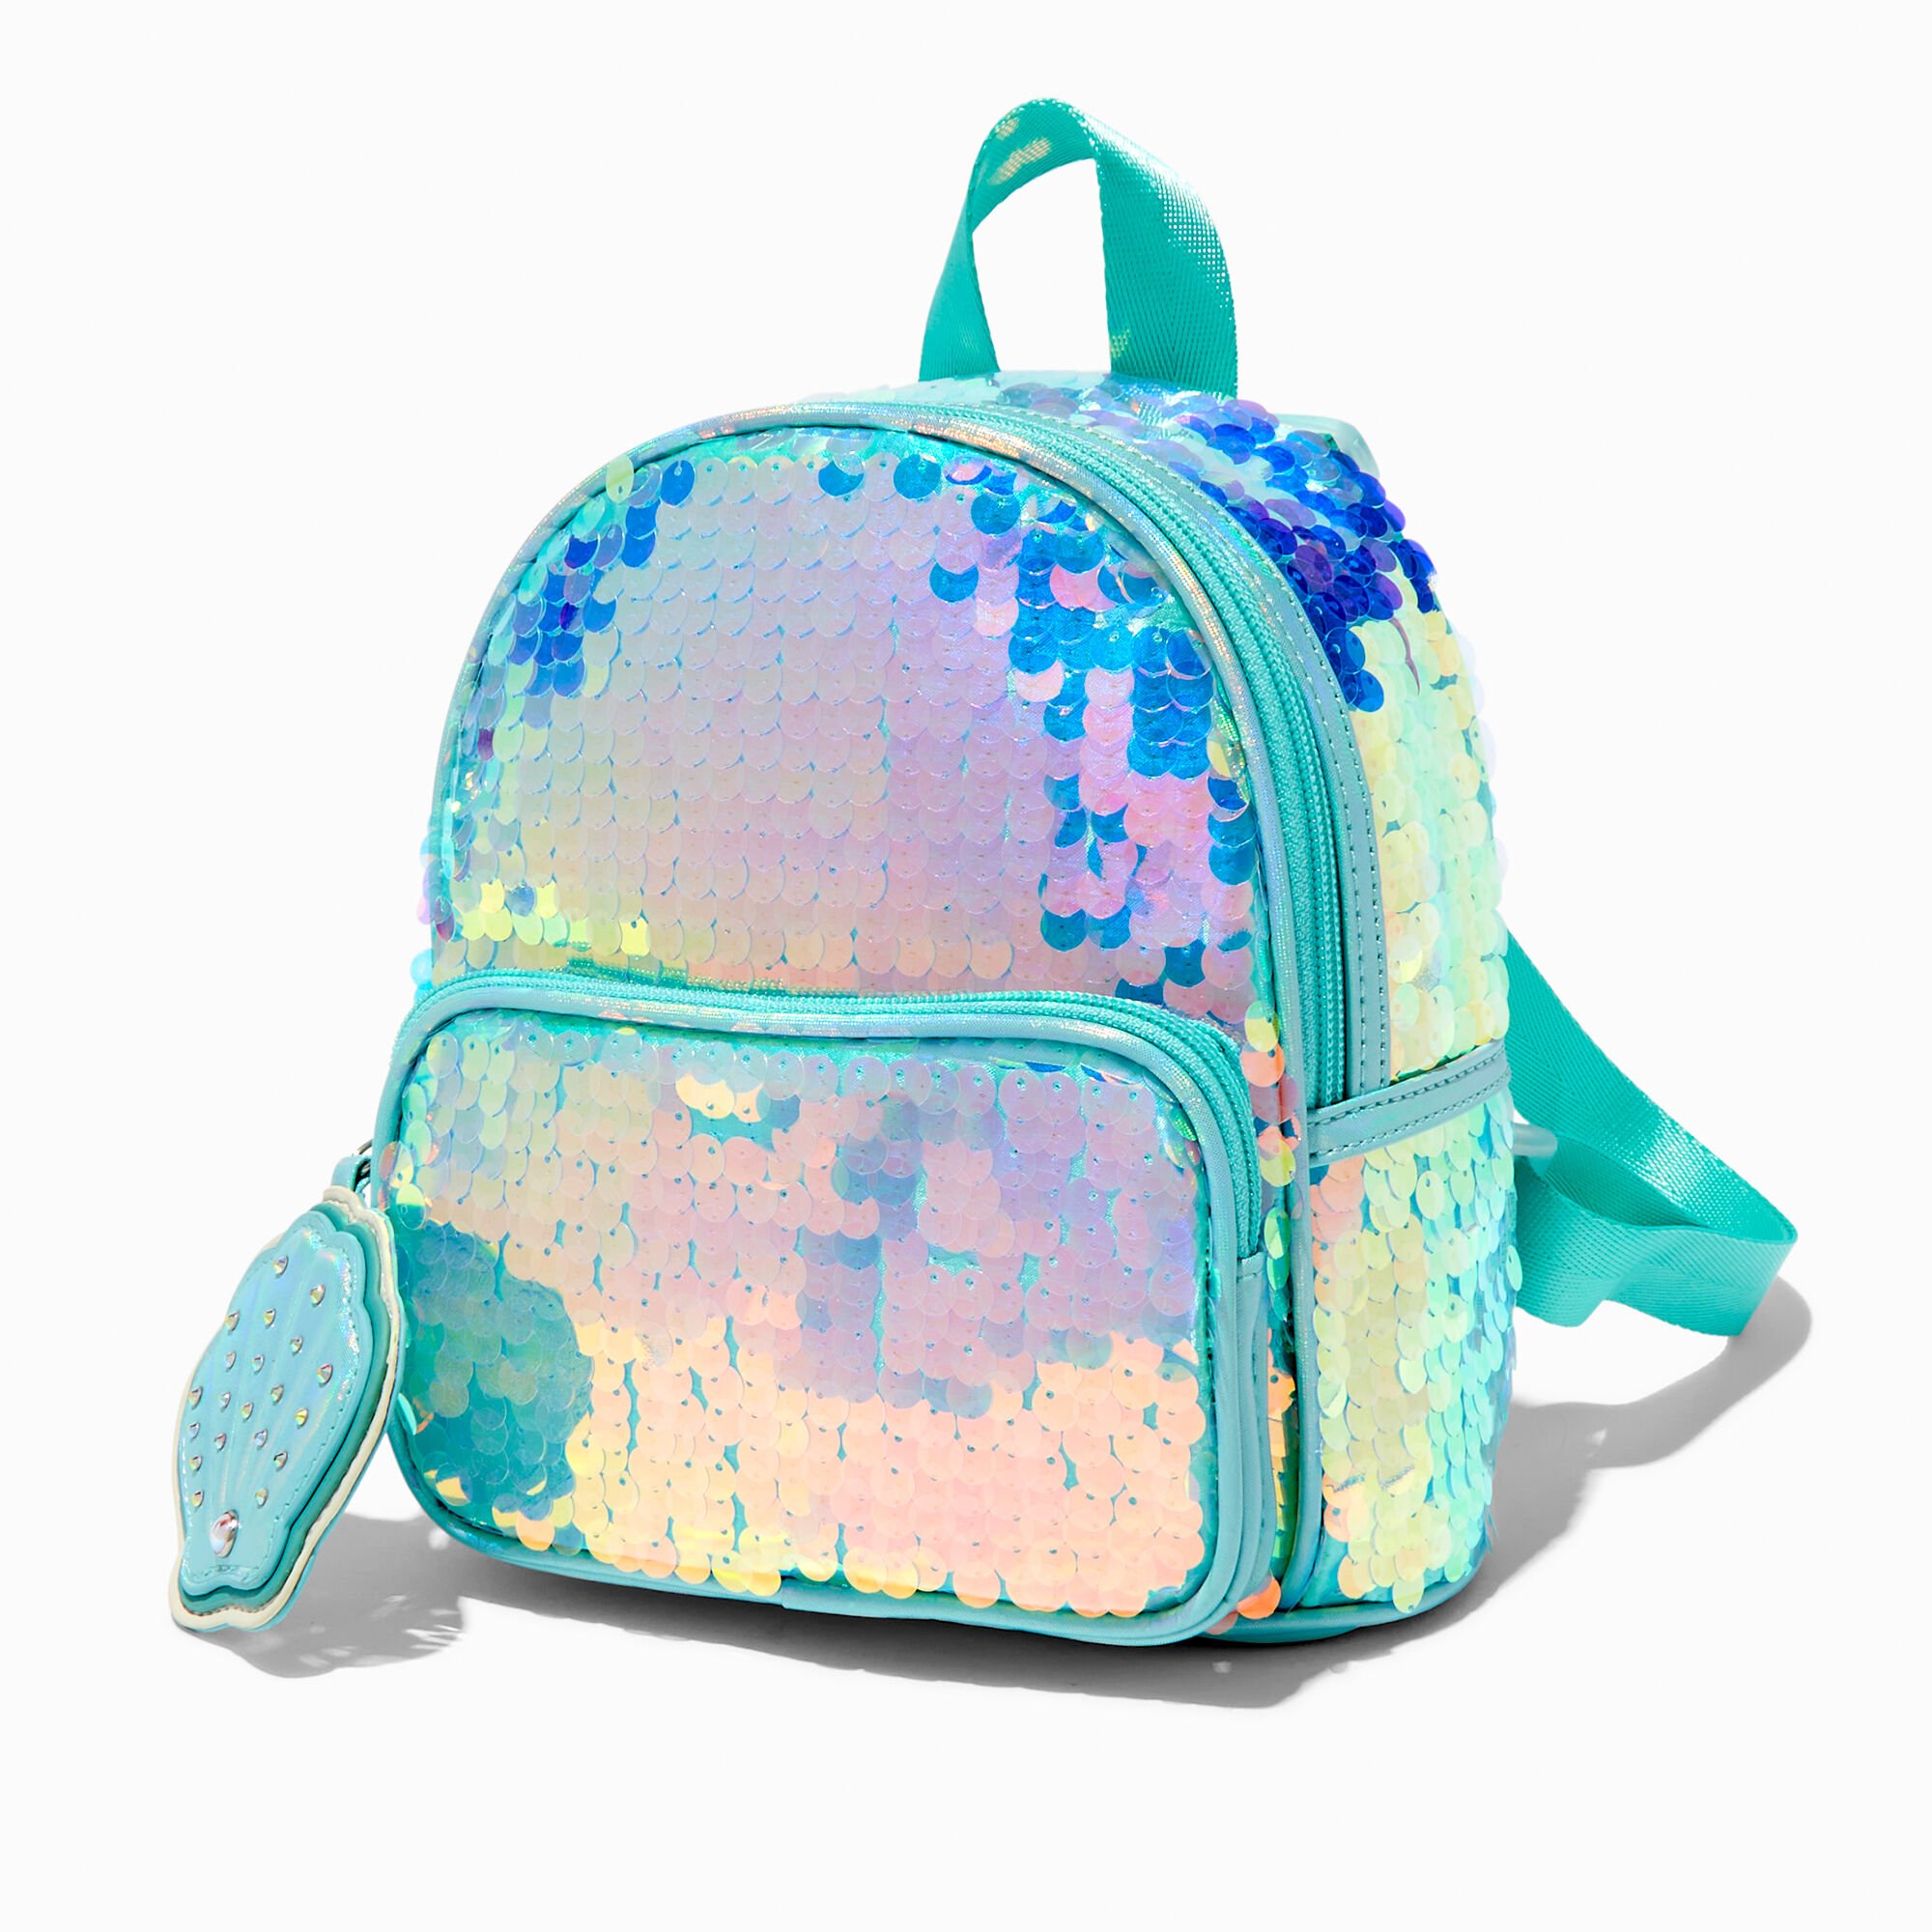 View Claires Club Mermaid Sequin Backpack information